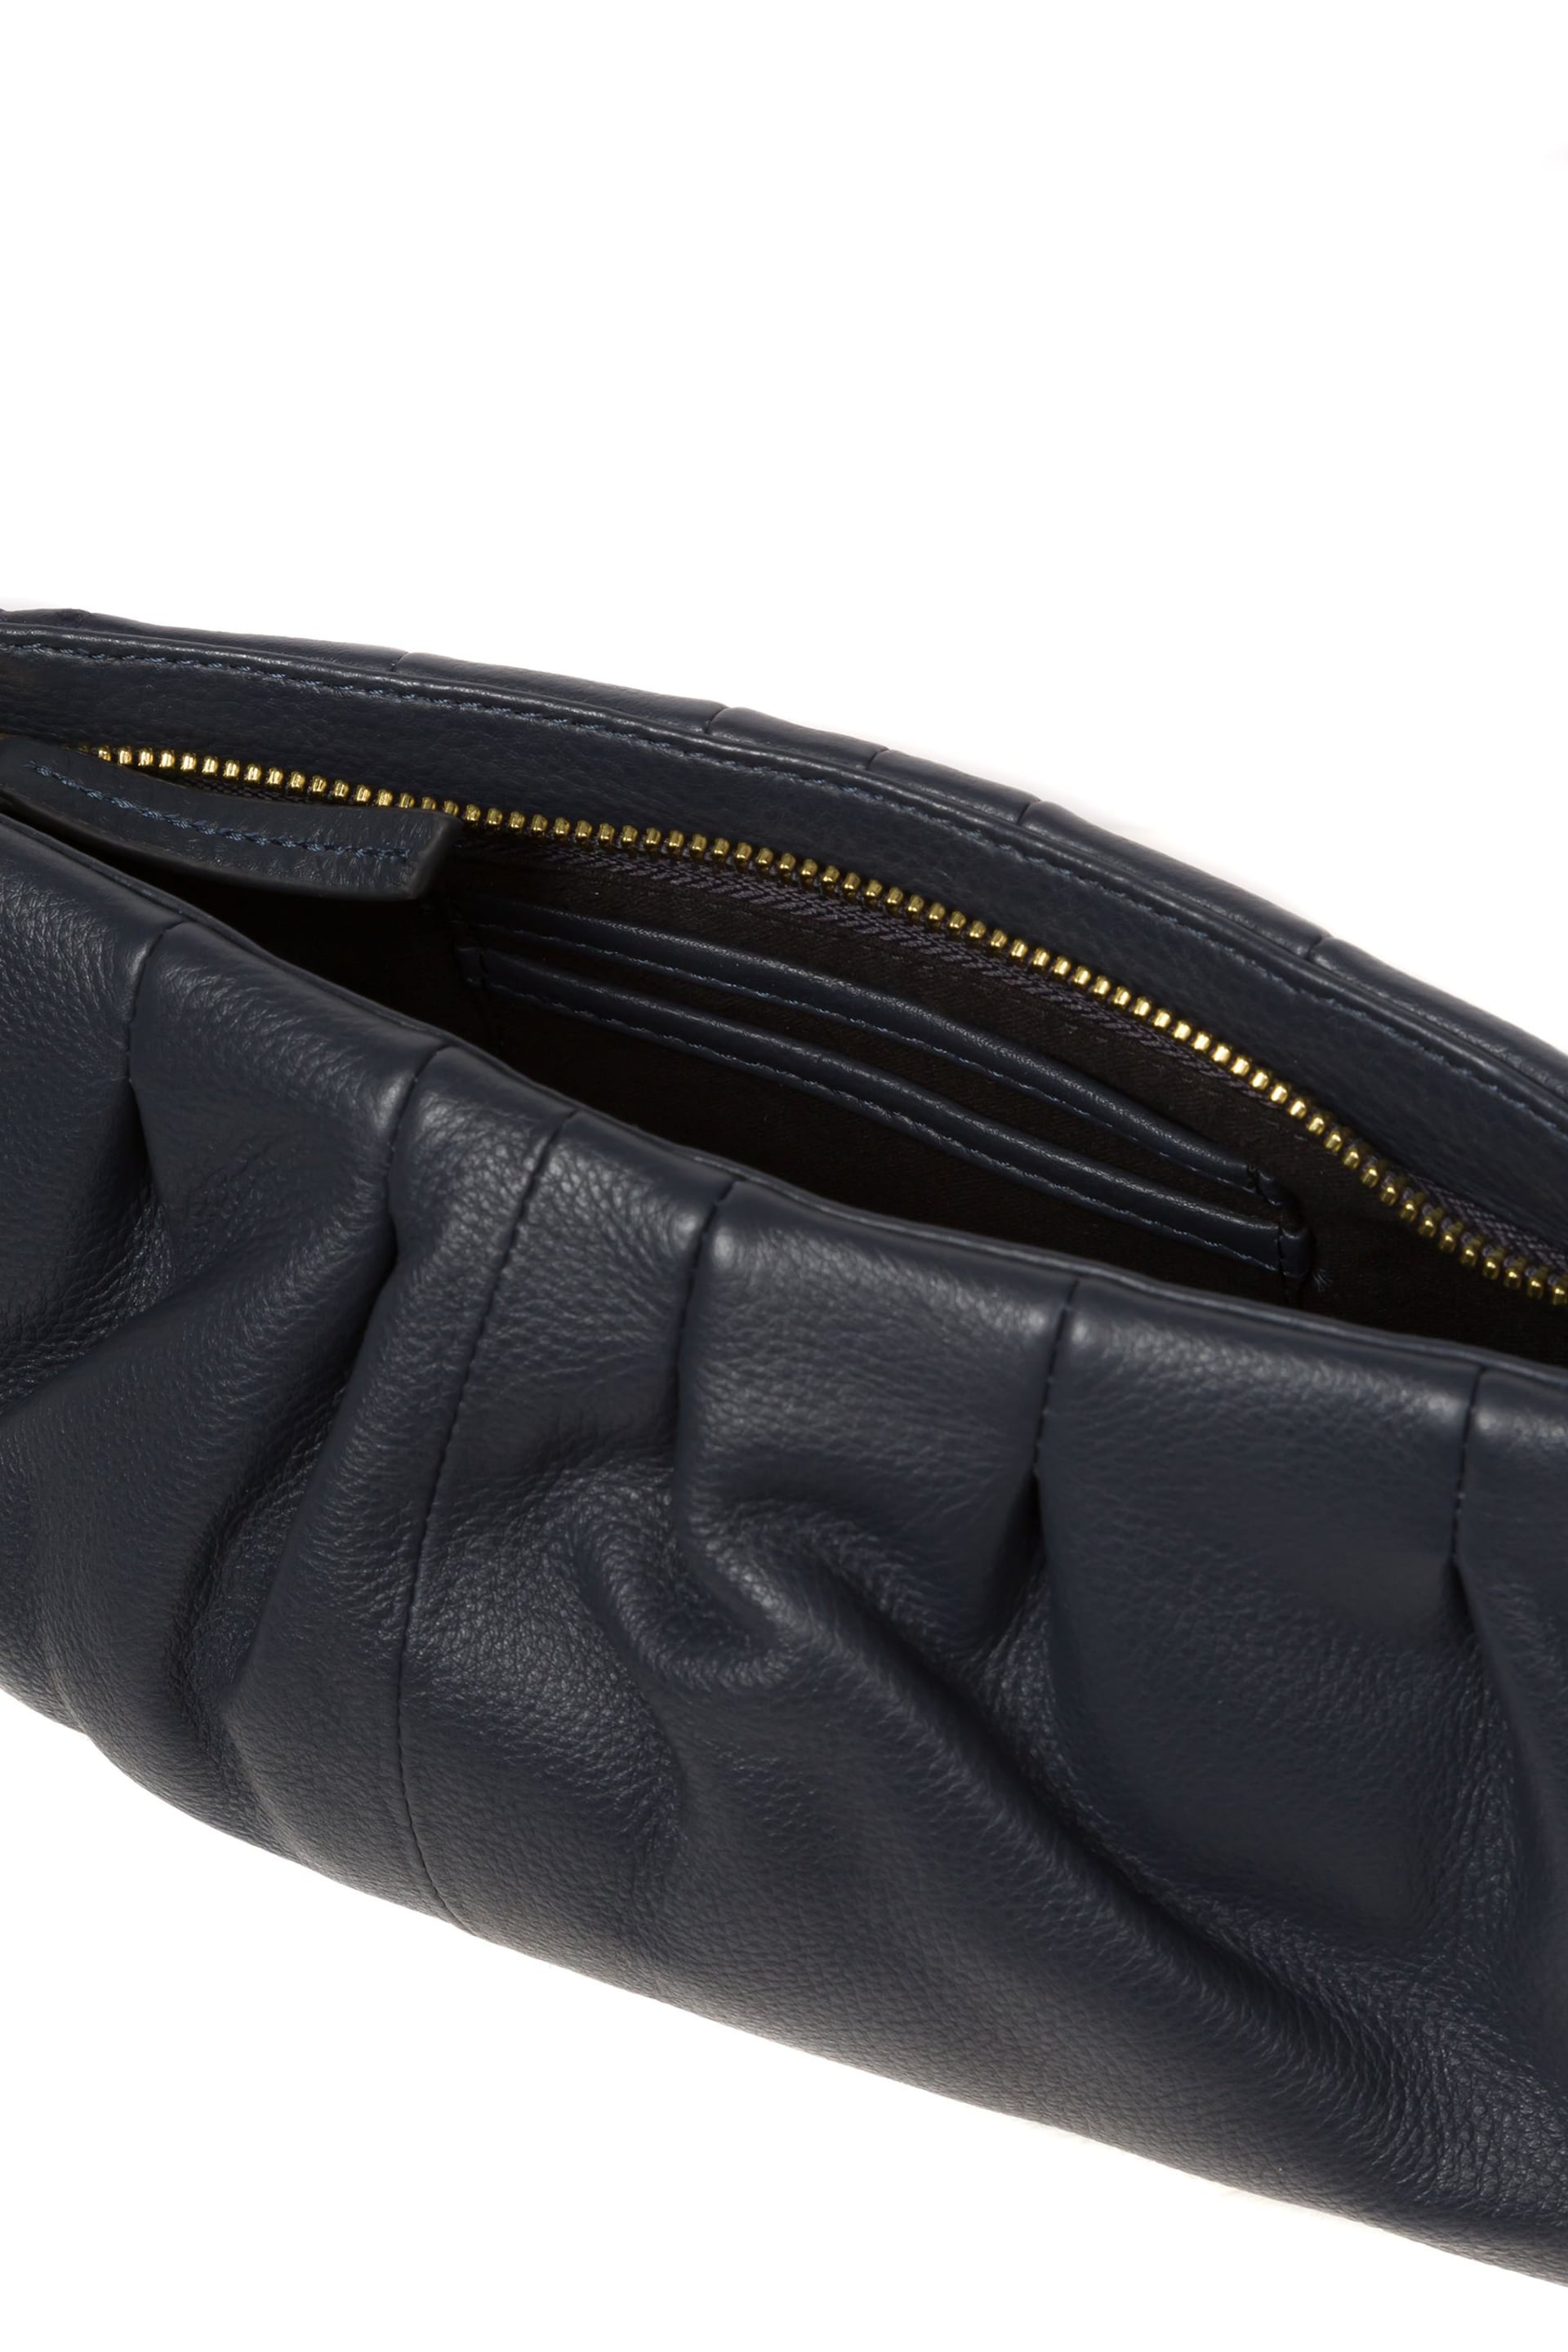 Pure Luxuries London Victoria Nappa Leather Grab Clutch Bag - Image 5 of 8